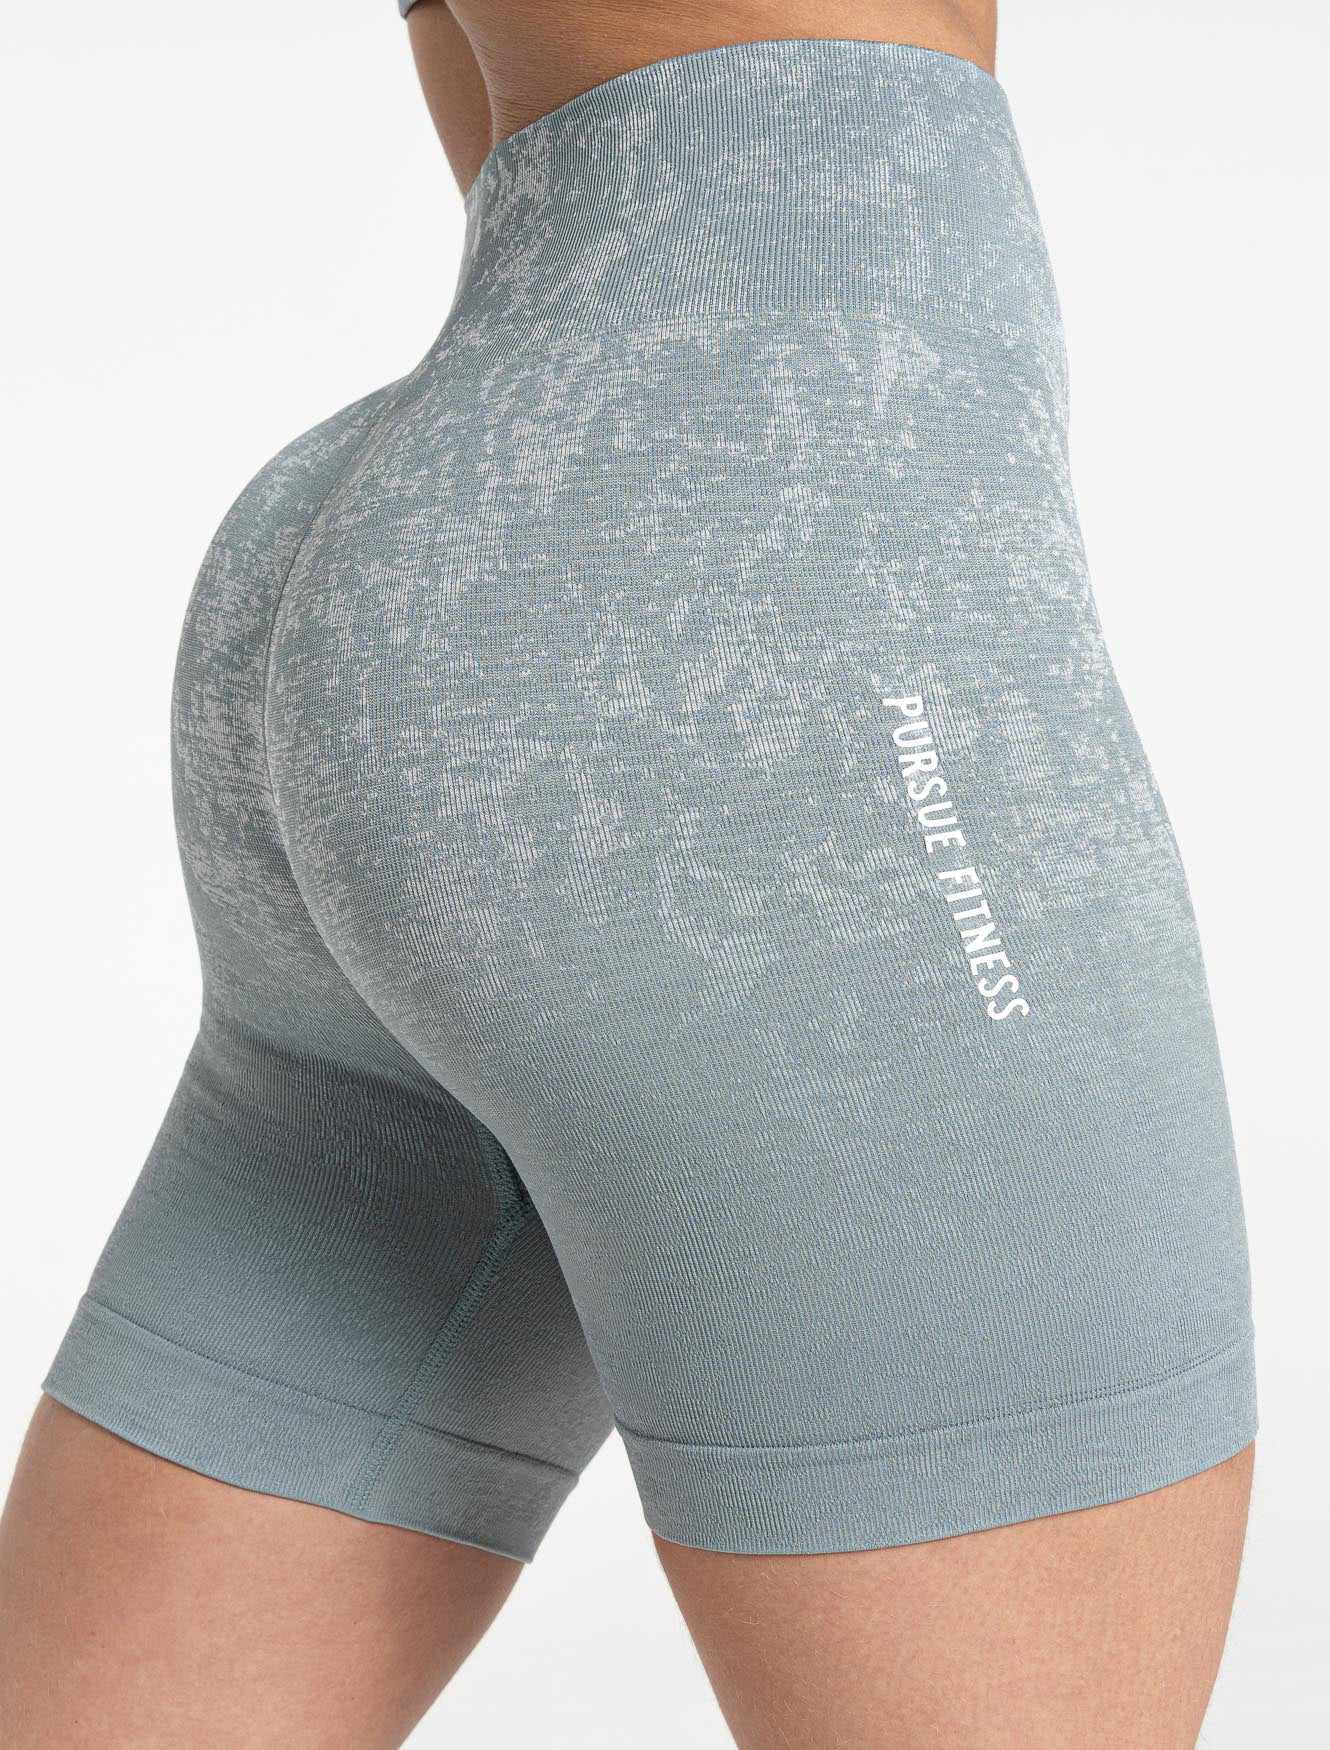 Cosmic Seamless Shorts / Teal Ombre Pursue Fitness 1